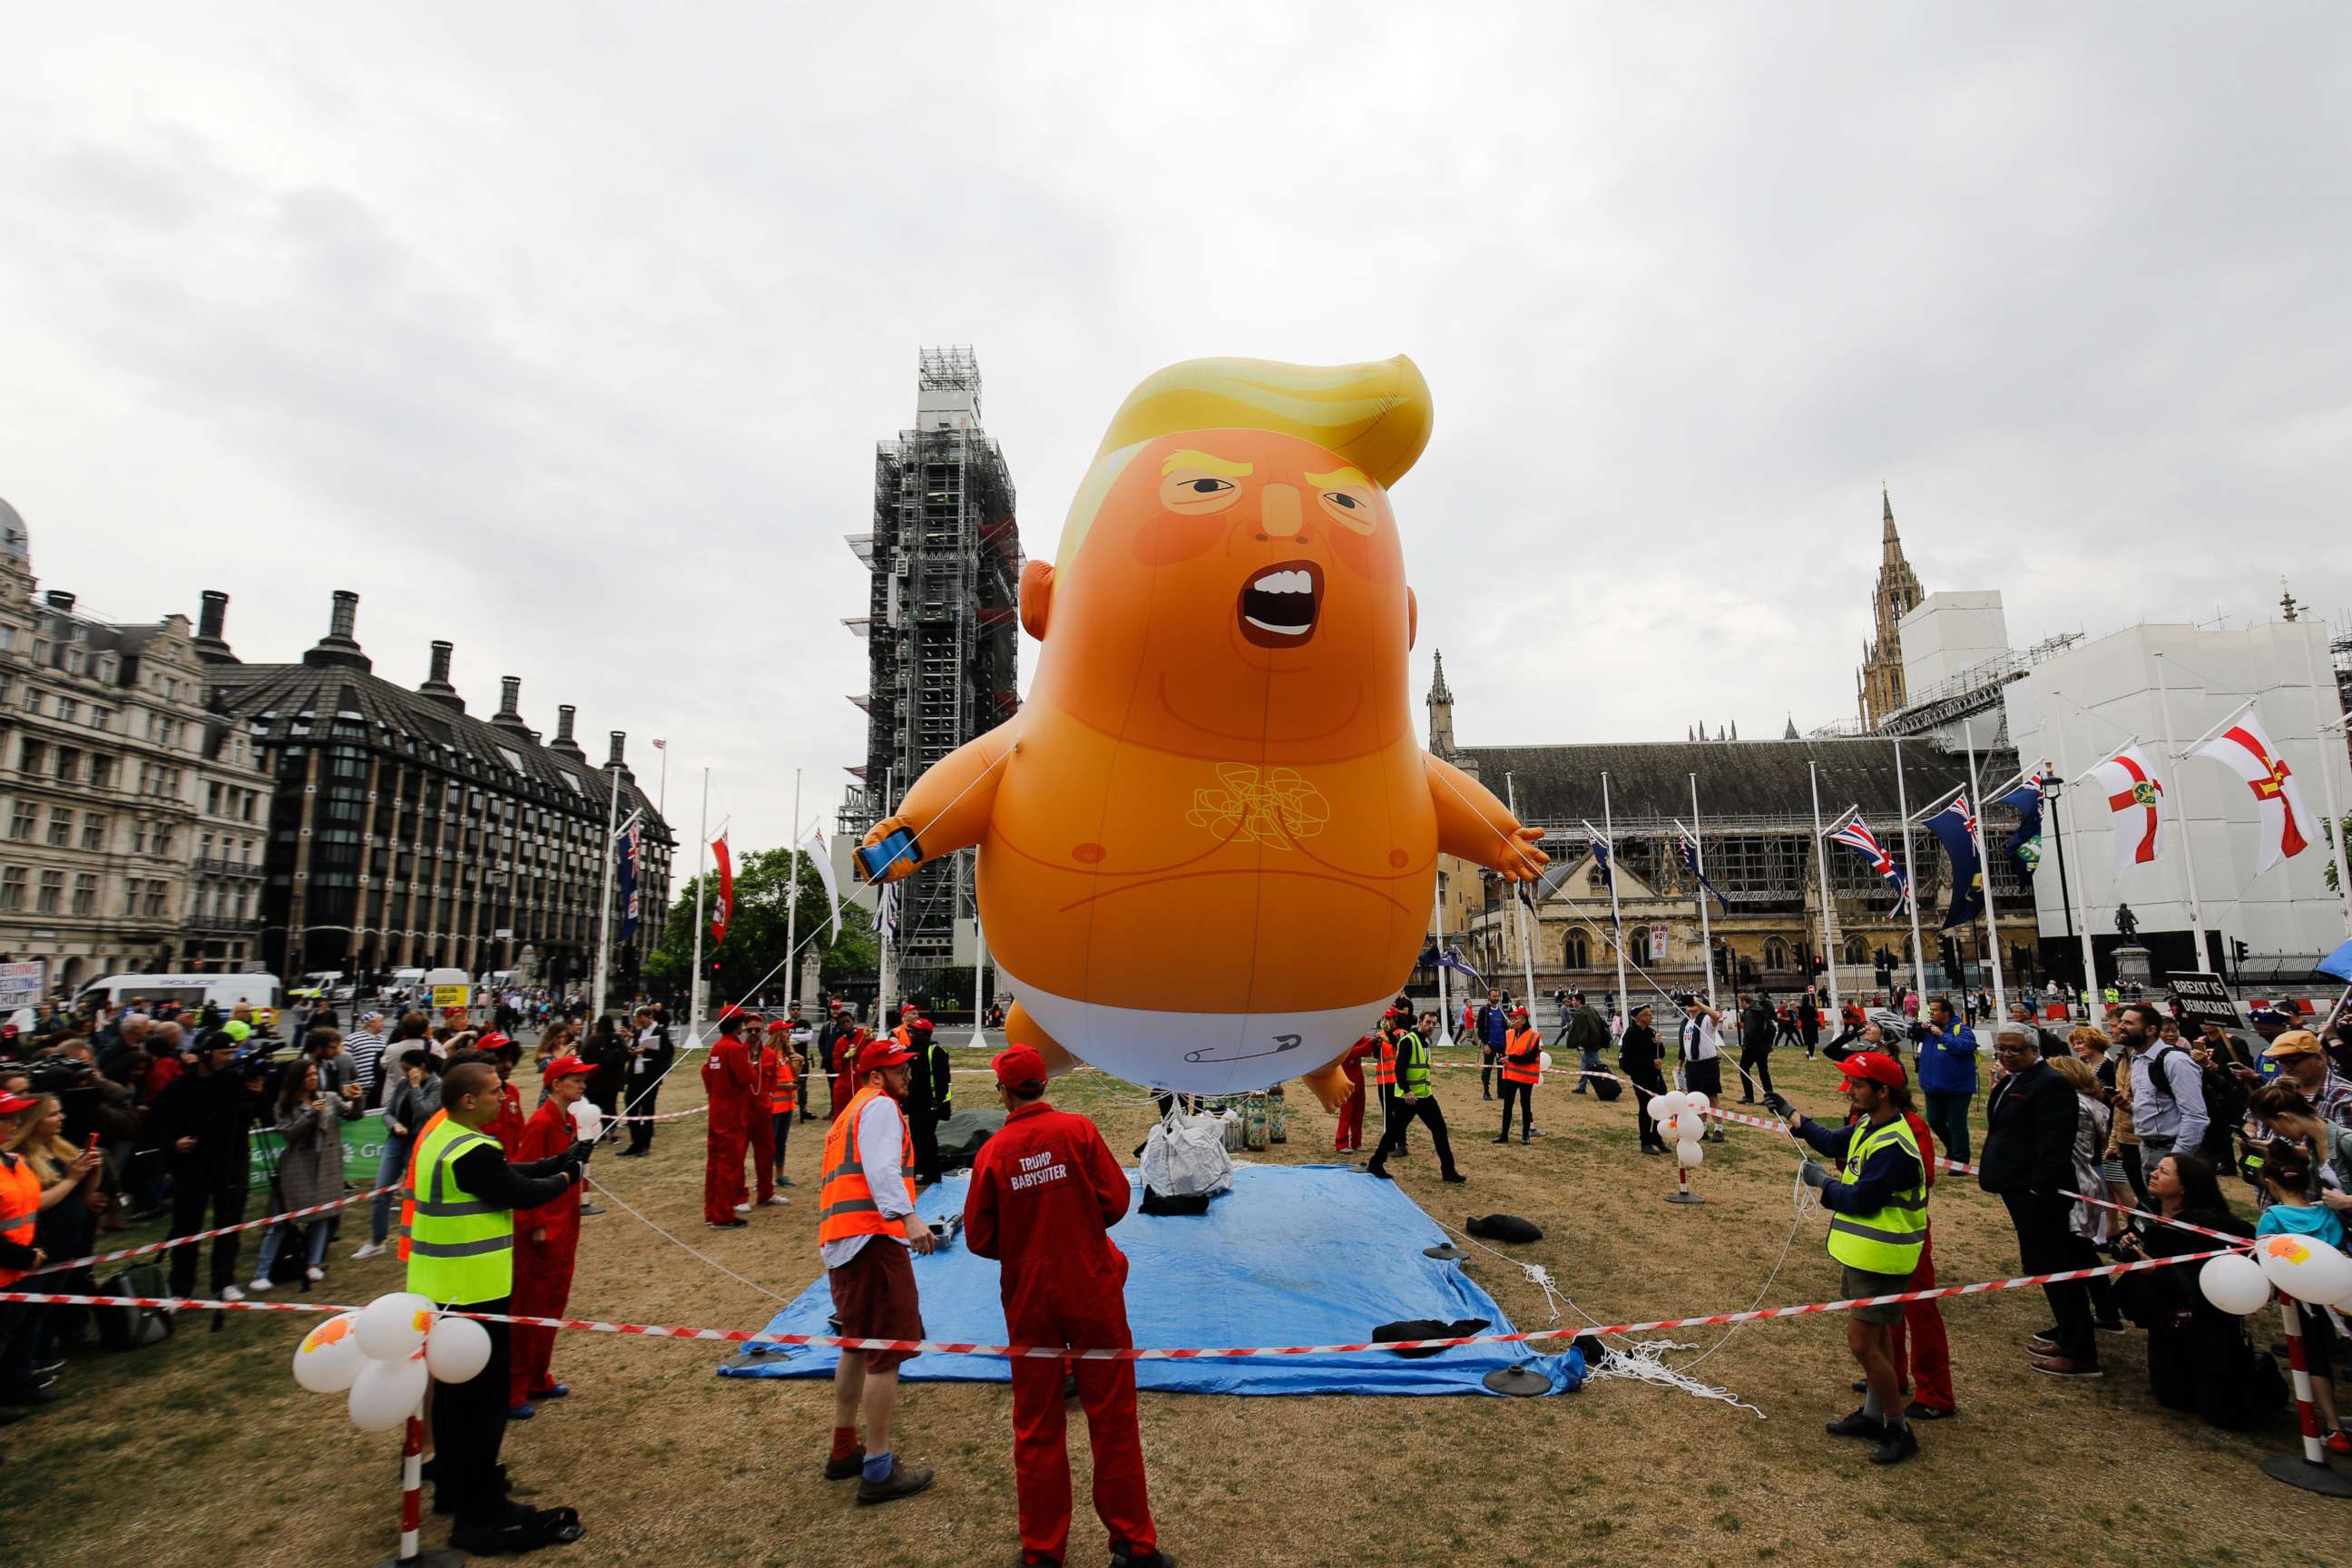 PHOTO: Anti-Trump demonstrators inflate a giant balloon depicting US President Donald Trump as an orange baby in Parliament Square in London on June 4, 2019.